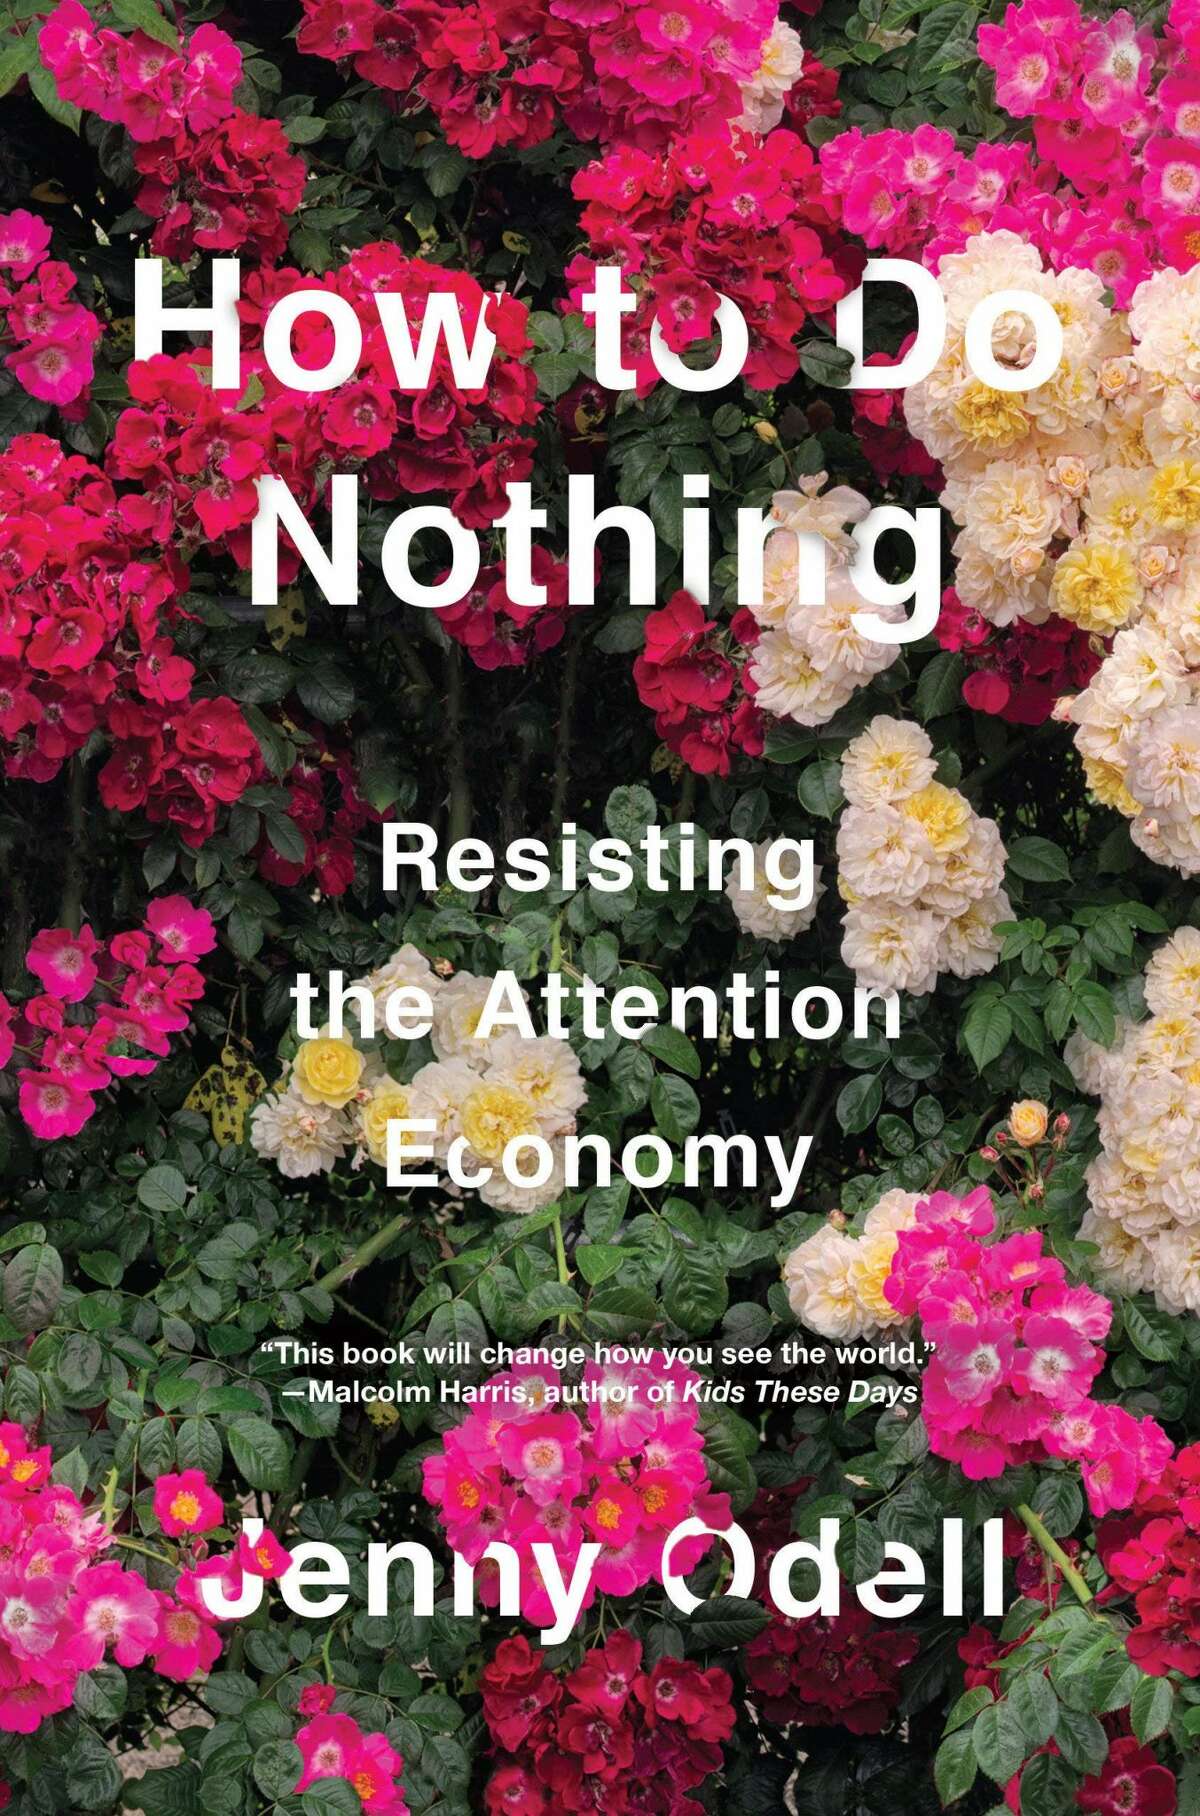 Oakland author Jenny Odell's "How to Do Nothing: Resisting the Attention Economy" made Barack Obama's best books of 2019 list.